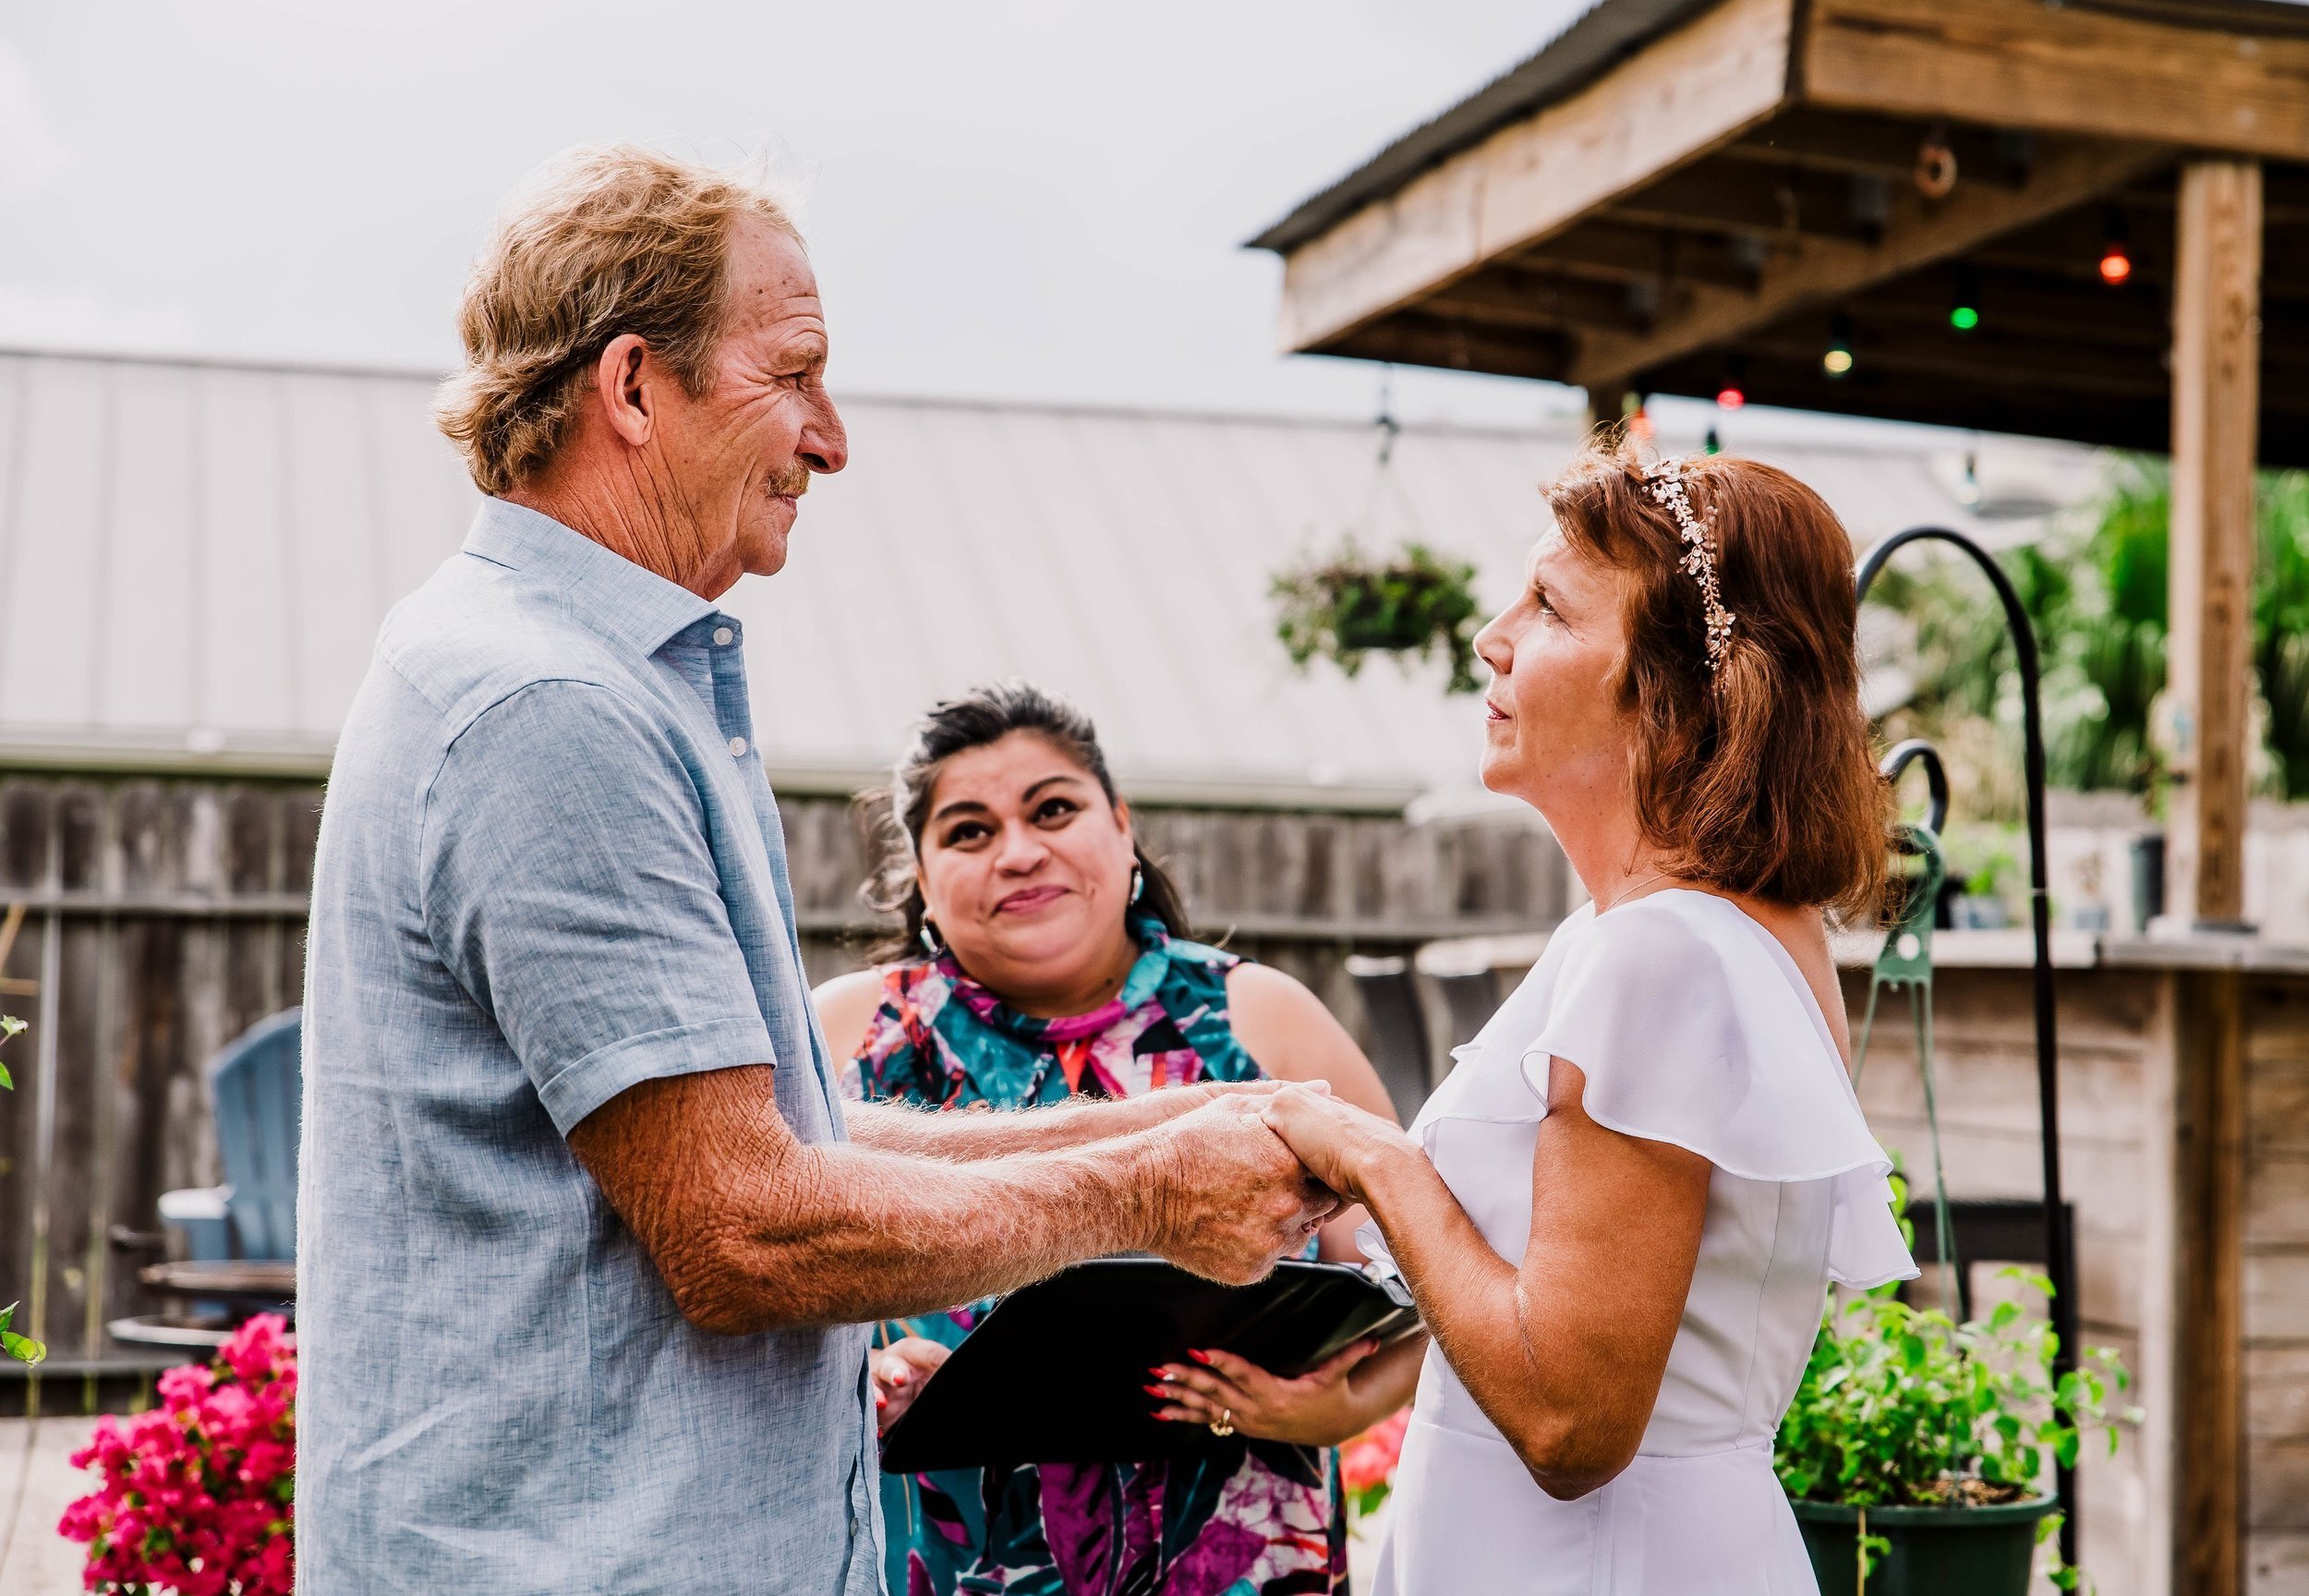 Padre Island Home Wedding officiated by The Love Officiant Renee Reyes